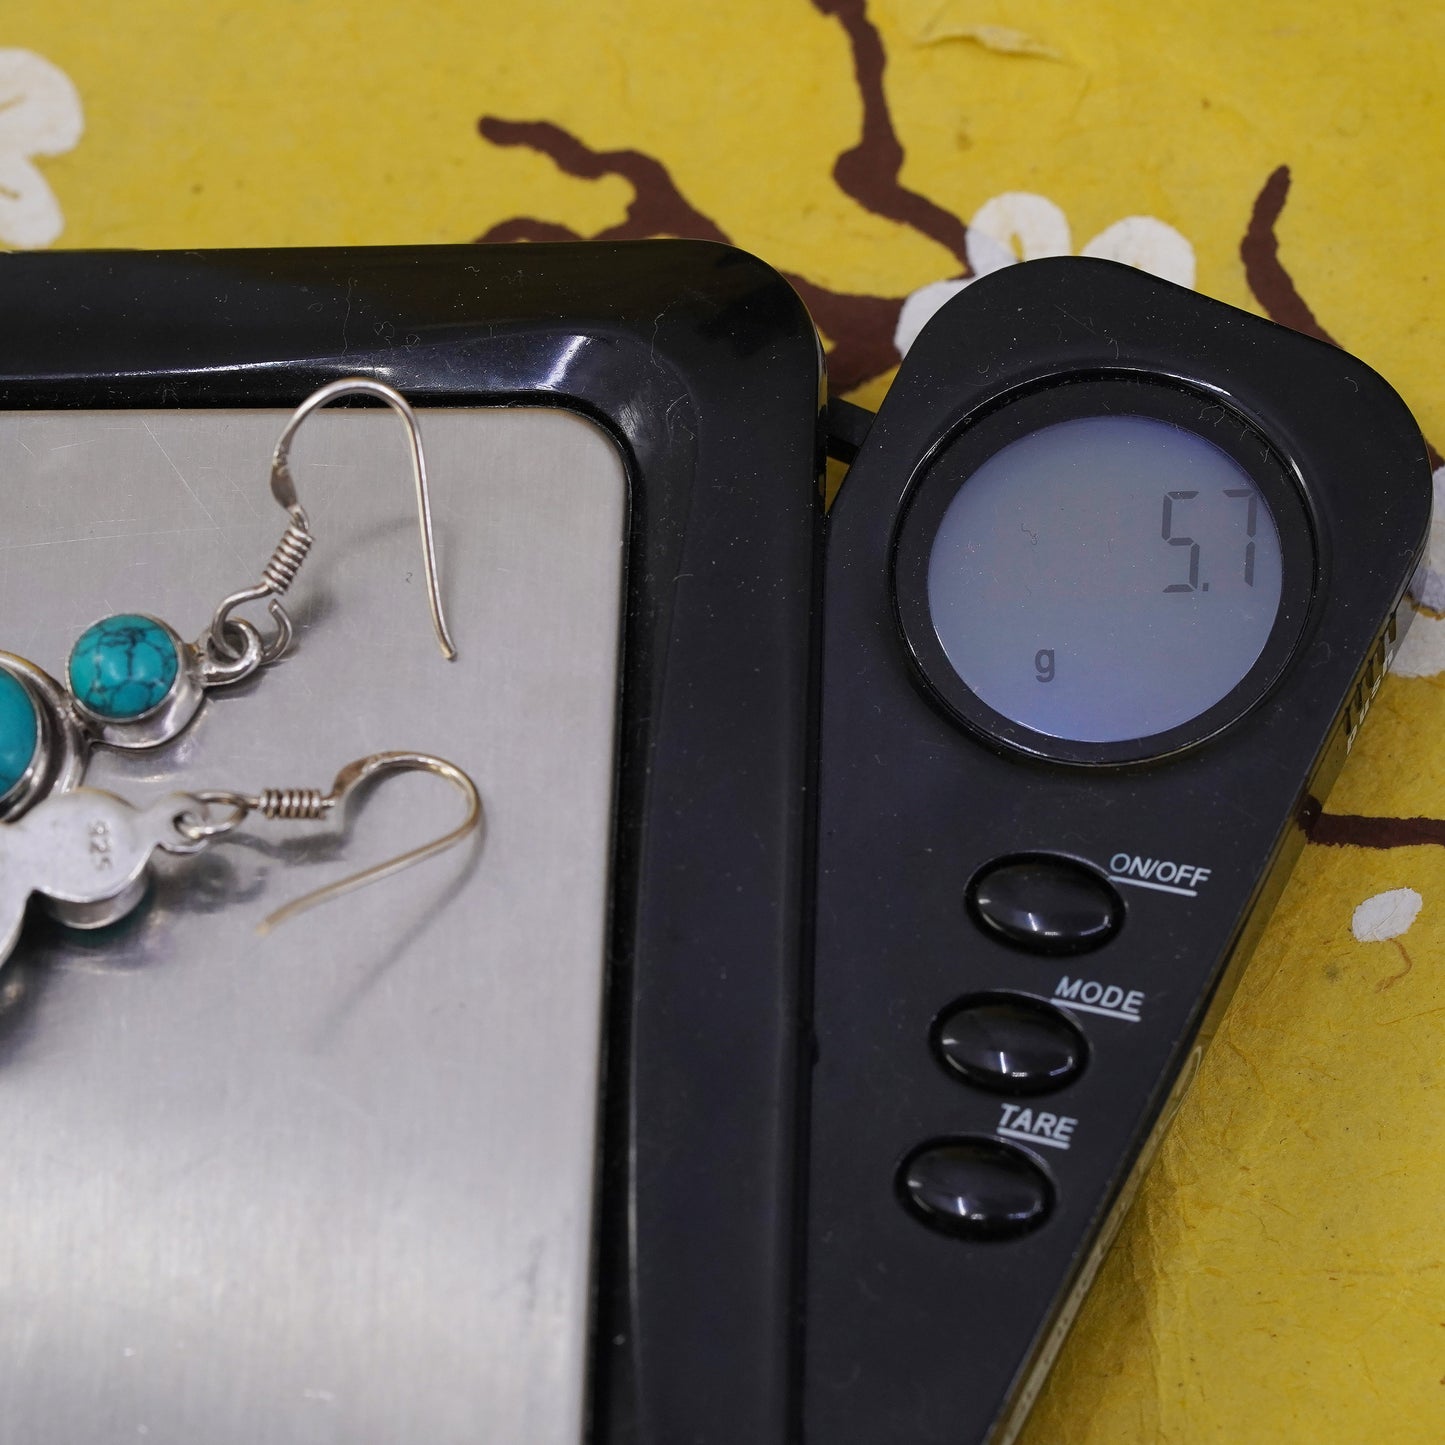 Southwestern Sterling 925 silver handmade earrings with turquoise